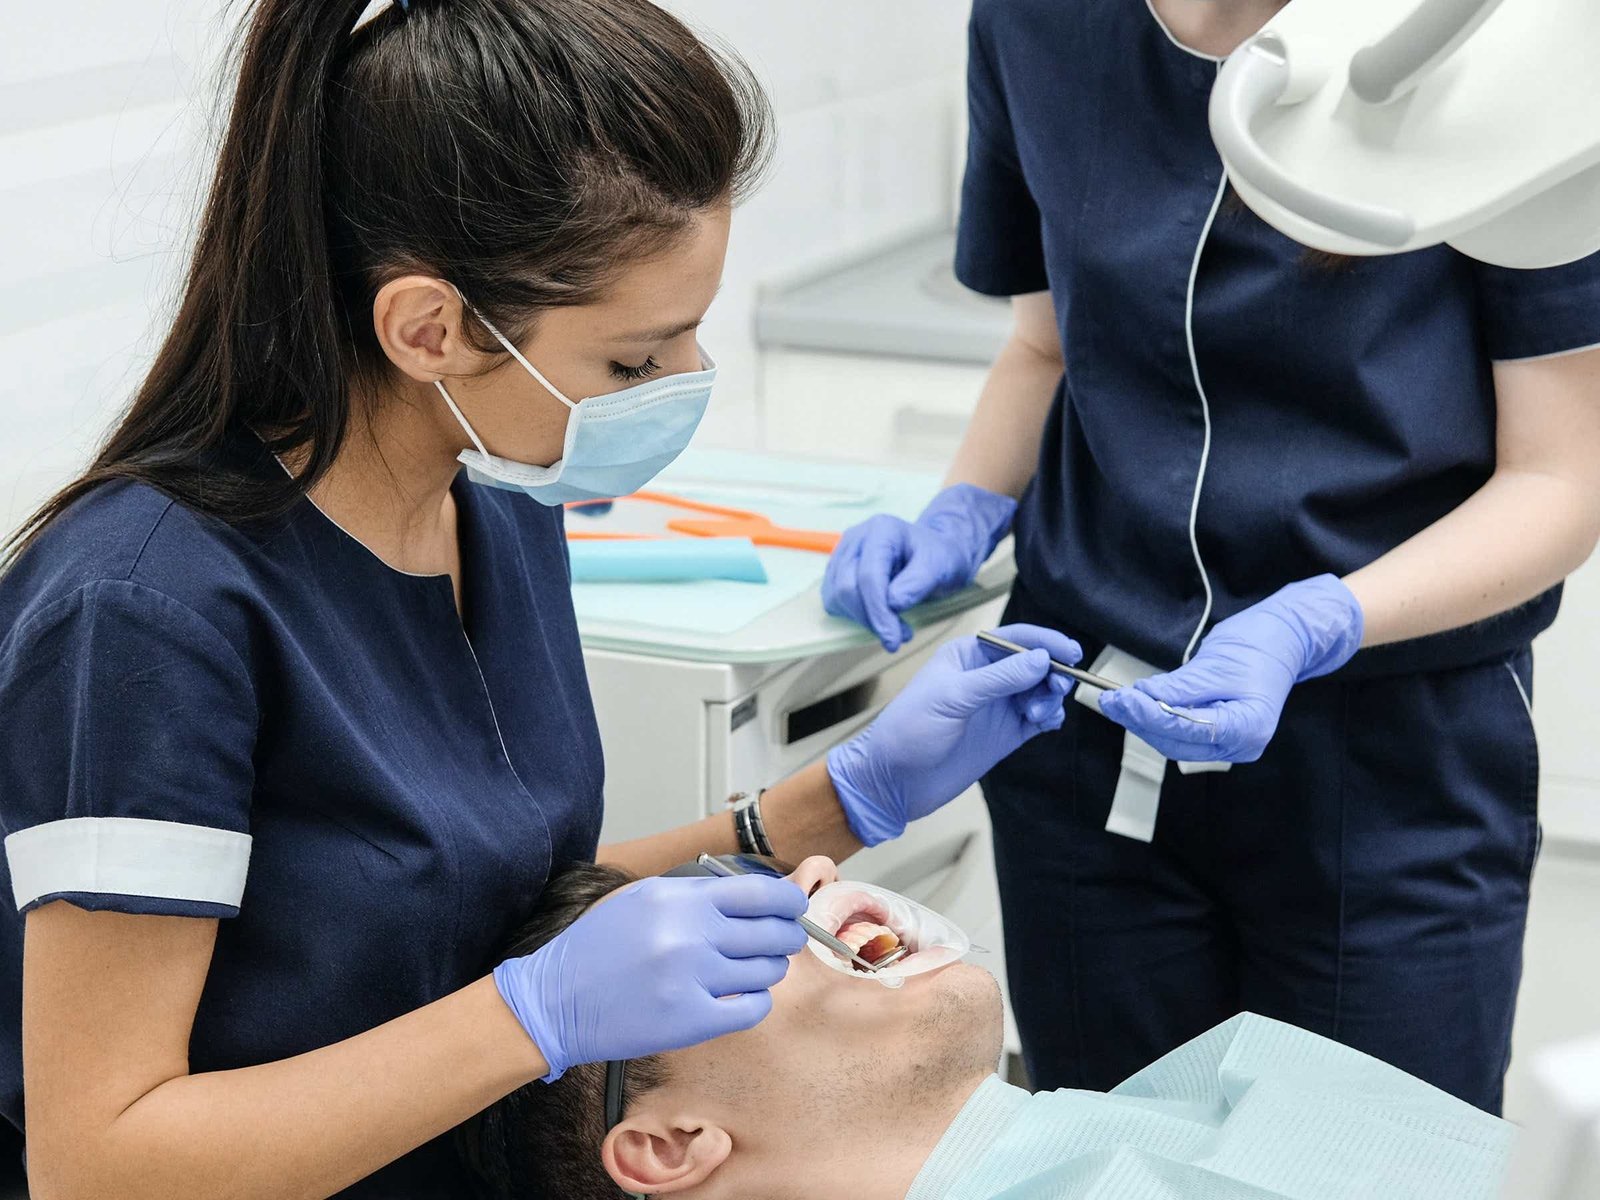 How To Secure A Dental Assistant Visa Sponsorship In The US